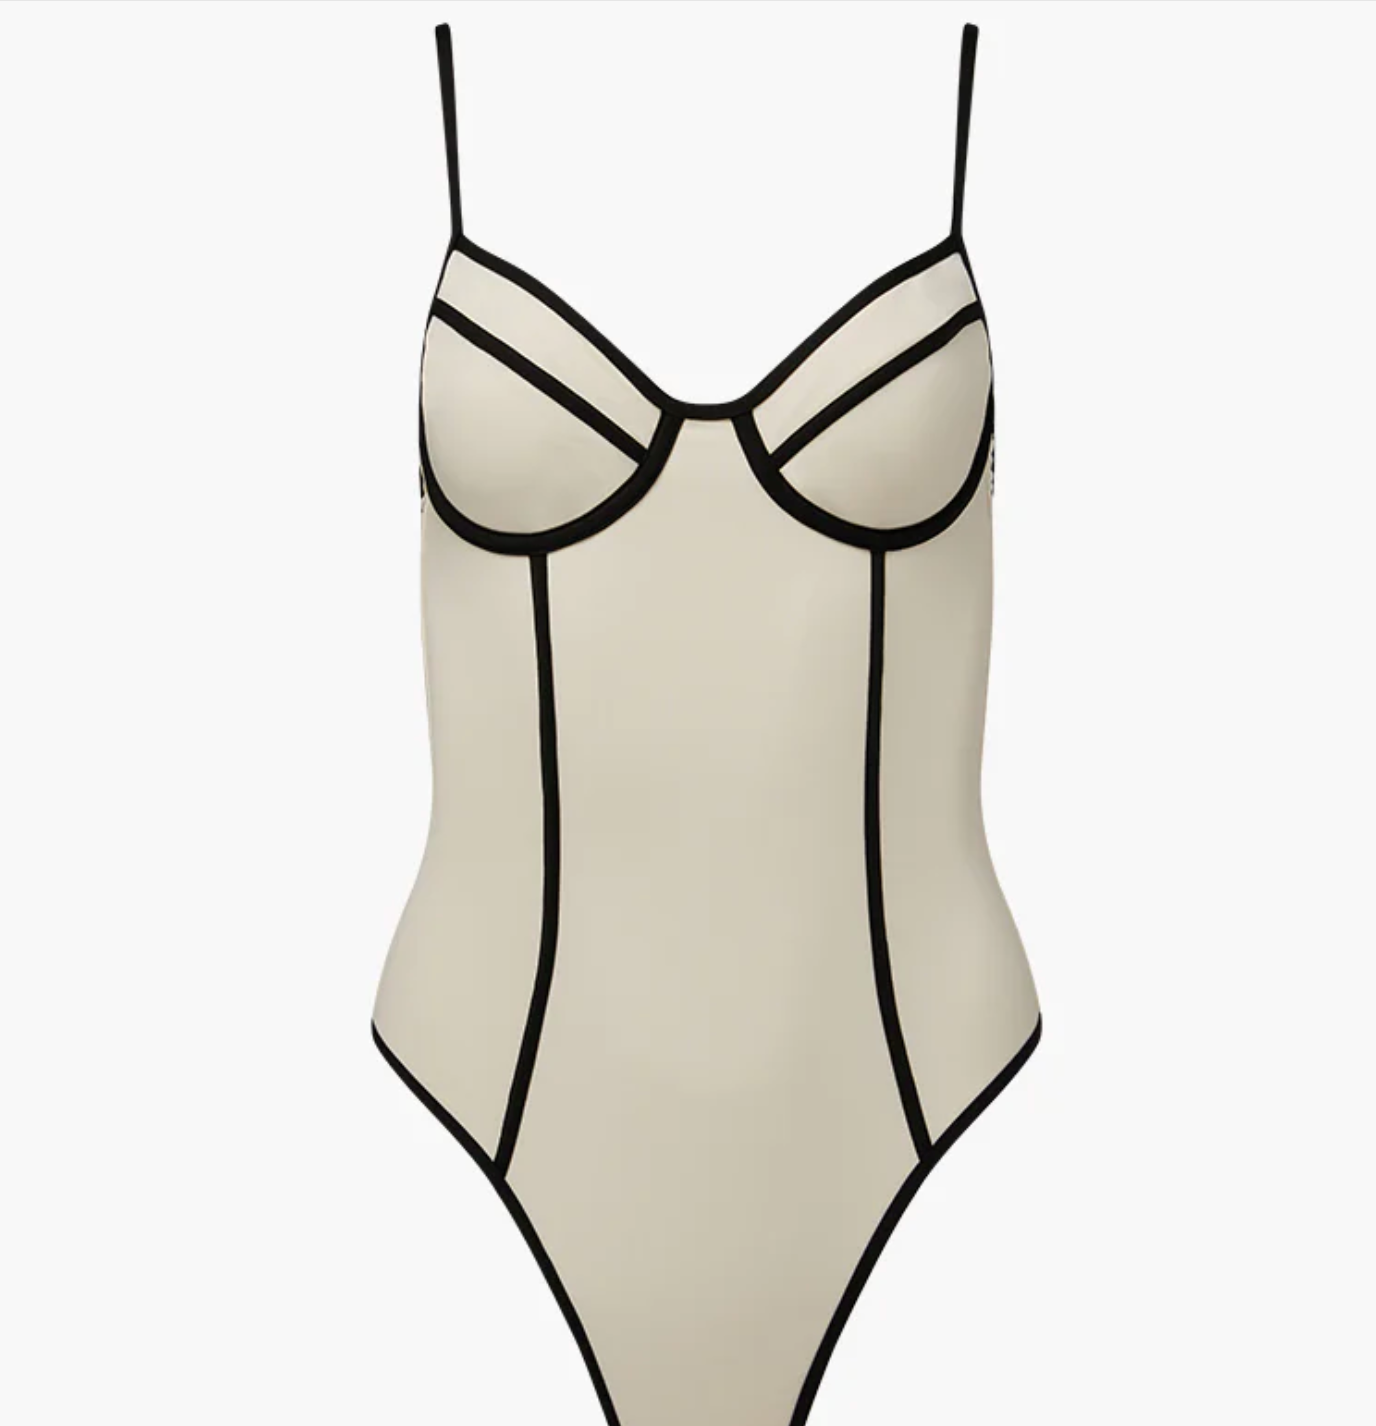 Danielle One Piece Swimsuit - Off White/Black - We Wore What